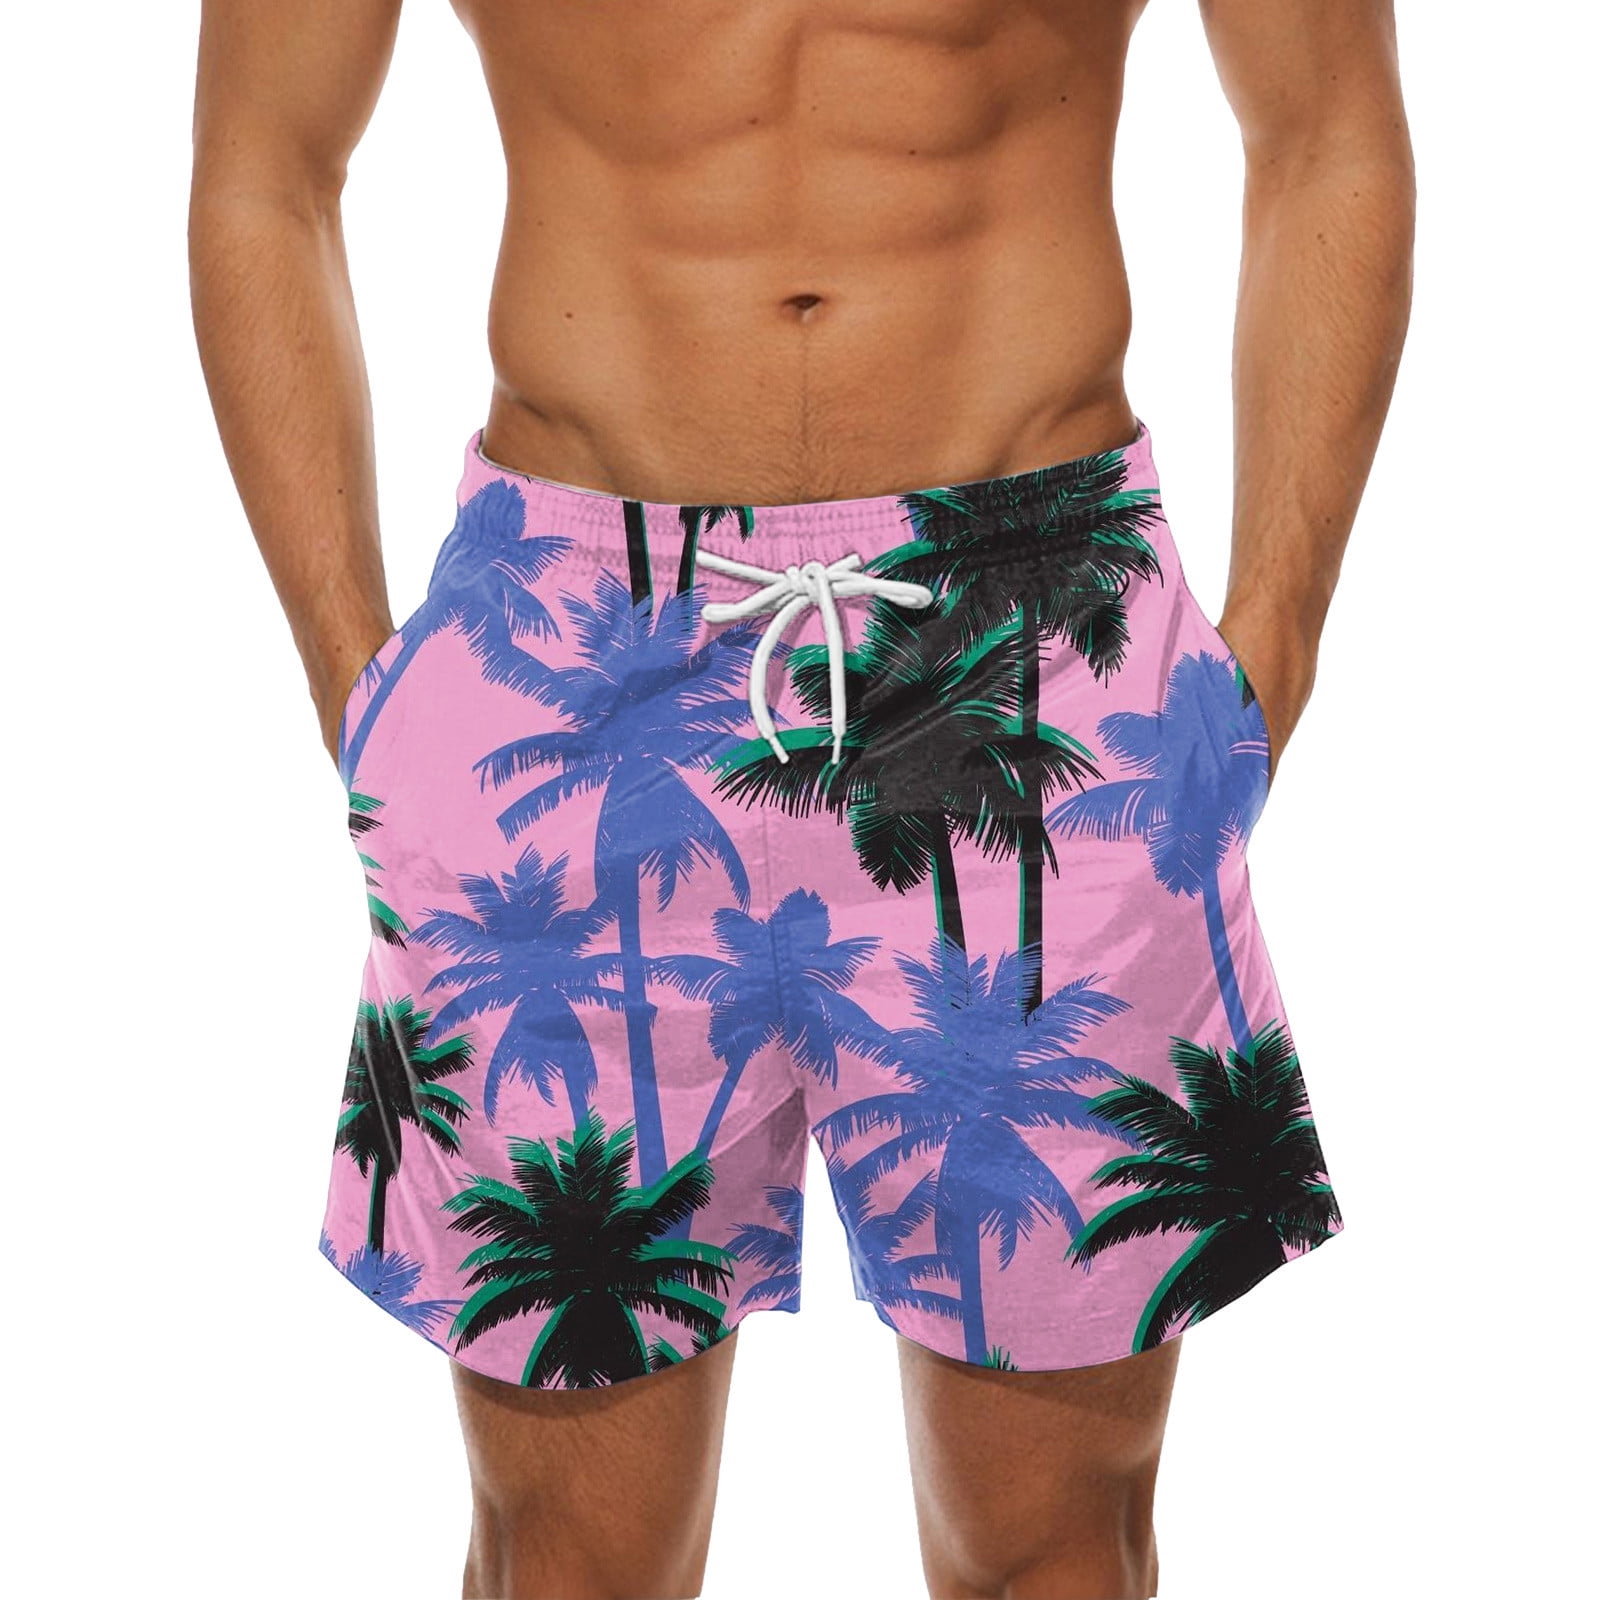 Leisue Modern Colorful Geometric Quick Dry Elastic Lace Boardshorts Beach Shorts Pants Swim Trunks Male Swimsuit with Pockets